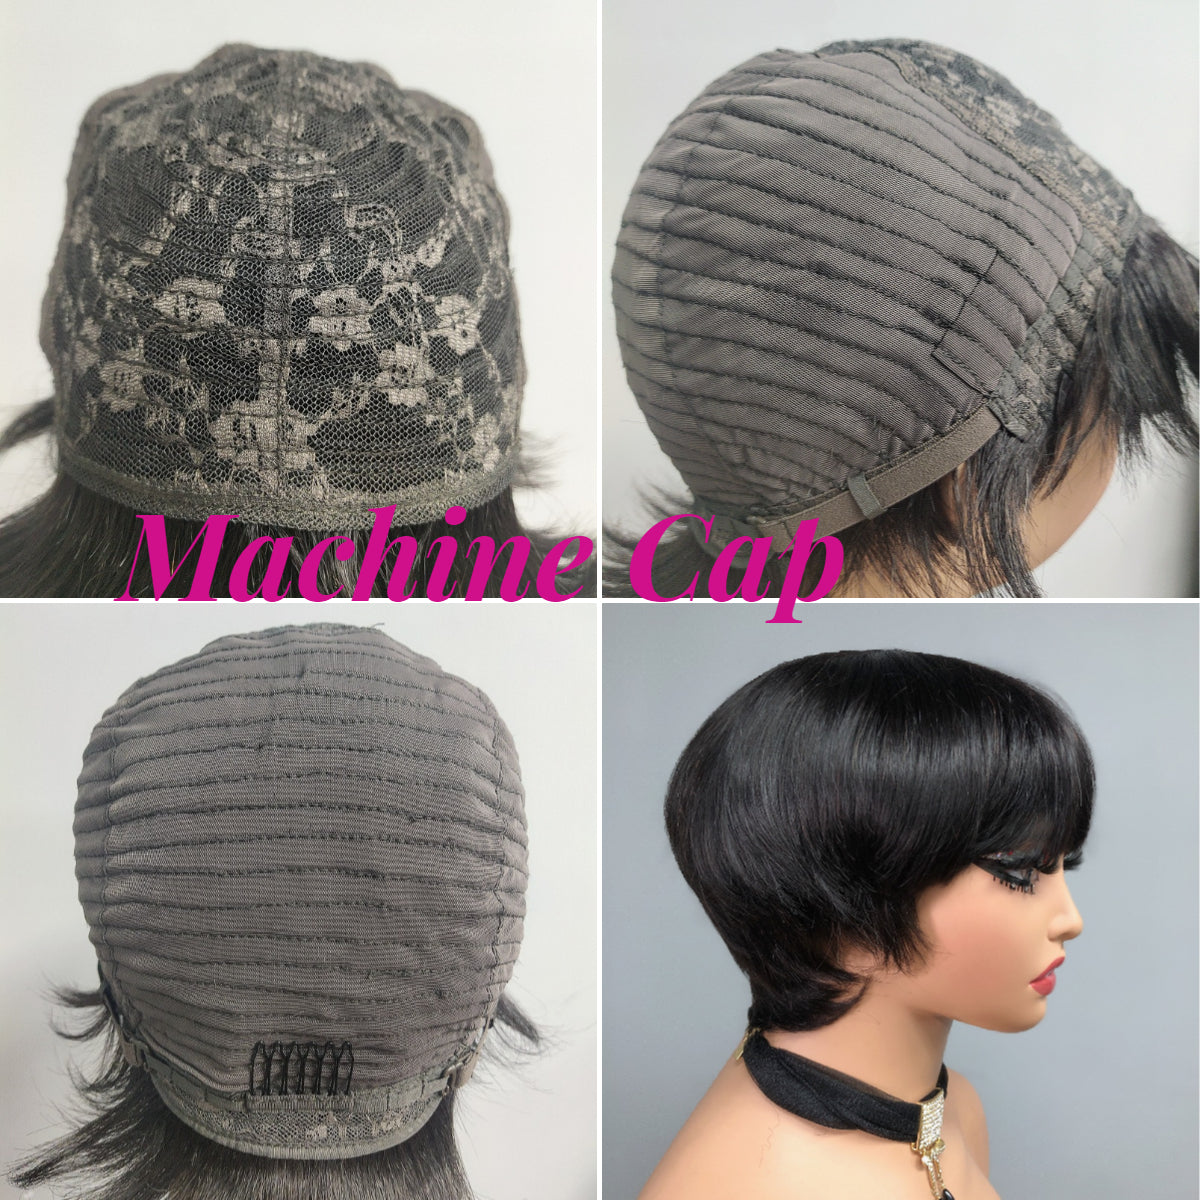 New 6 Inch Afro Kinky Curly Bob Wig With Bangs  Curly Pixie Cut Glueless Wig Machine Human Hair Wigs For Black Women -Amanda Hair